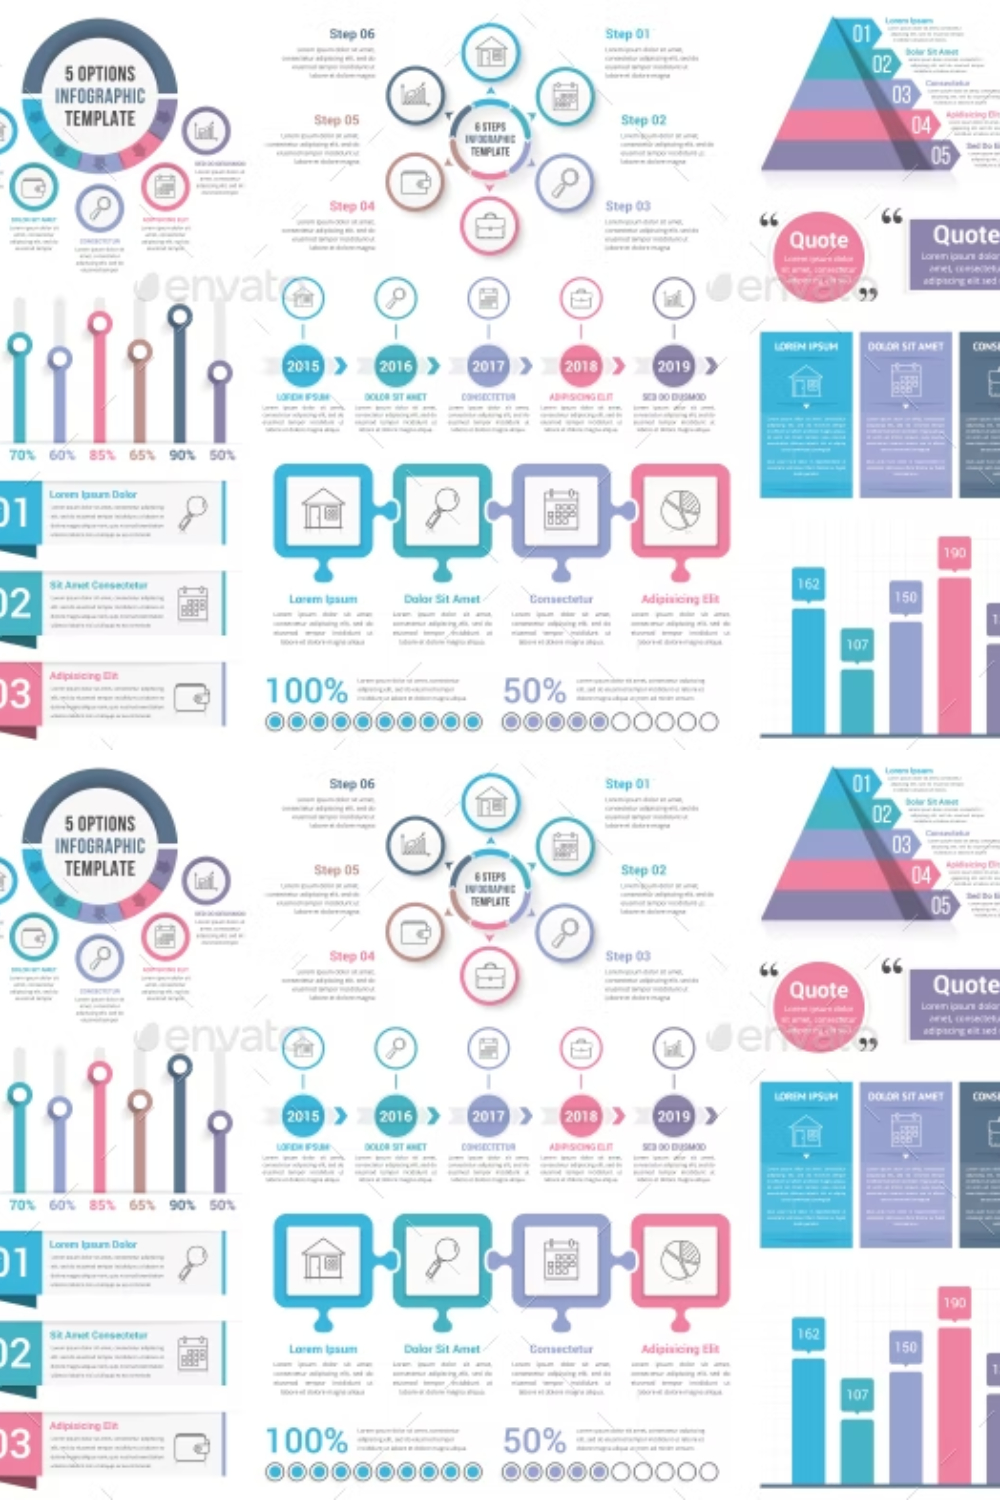 Infographic Elements Pinterest Cover.